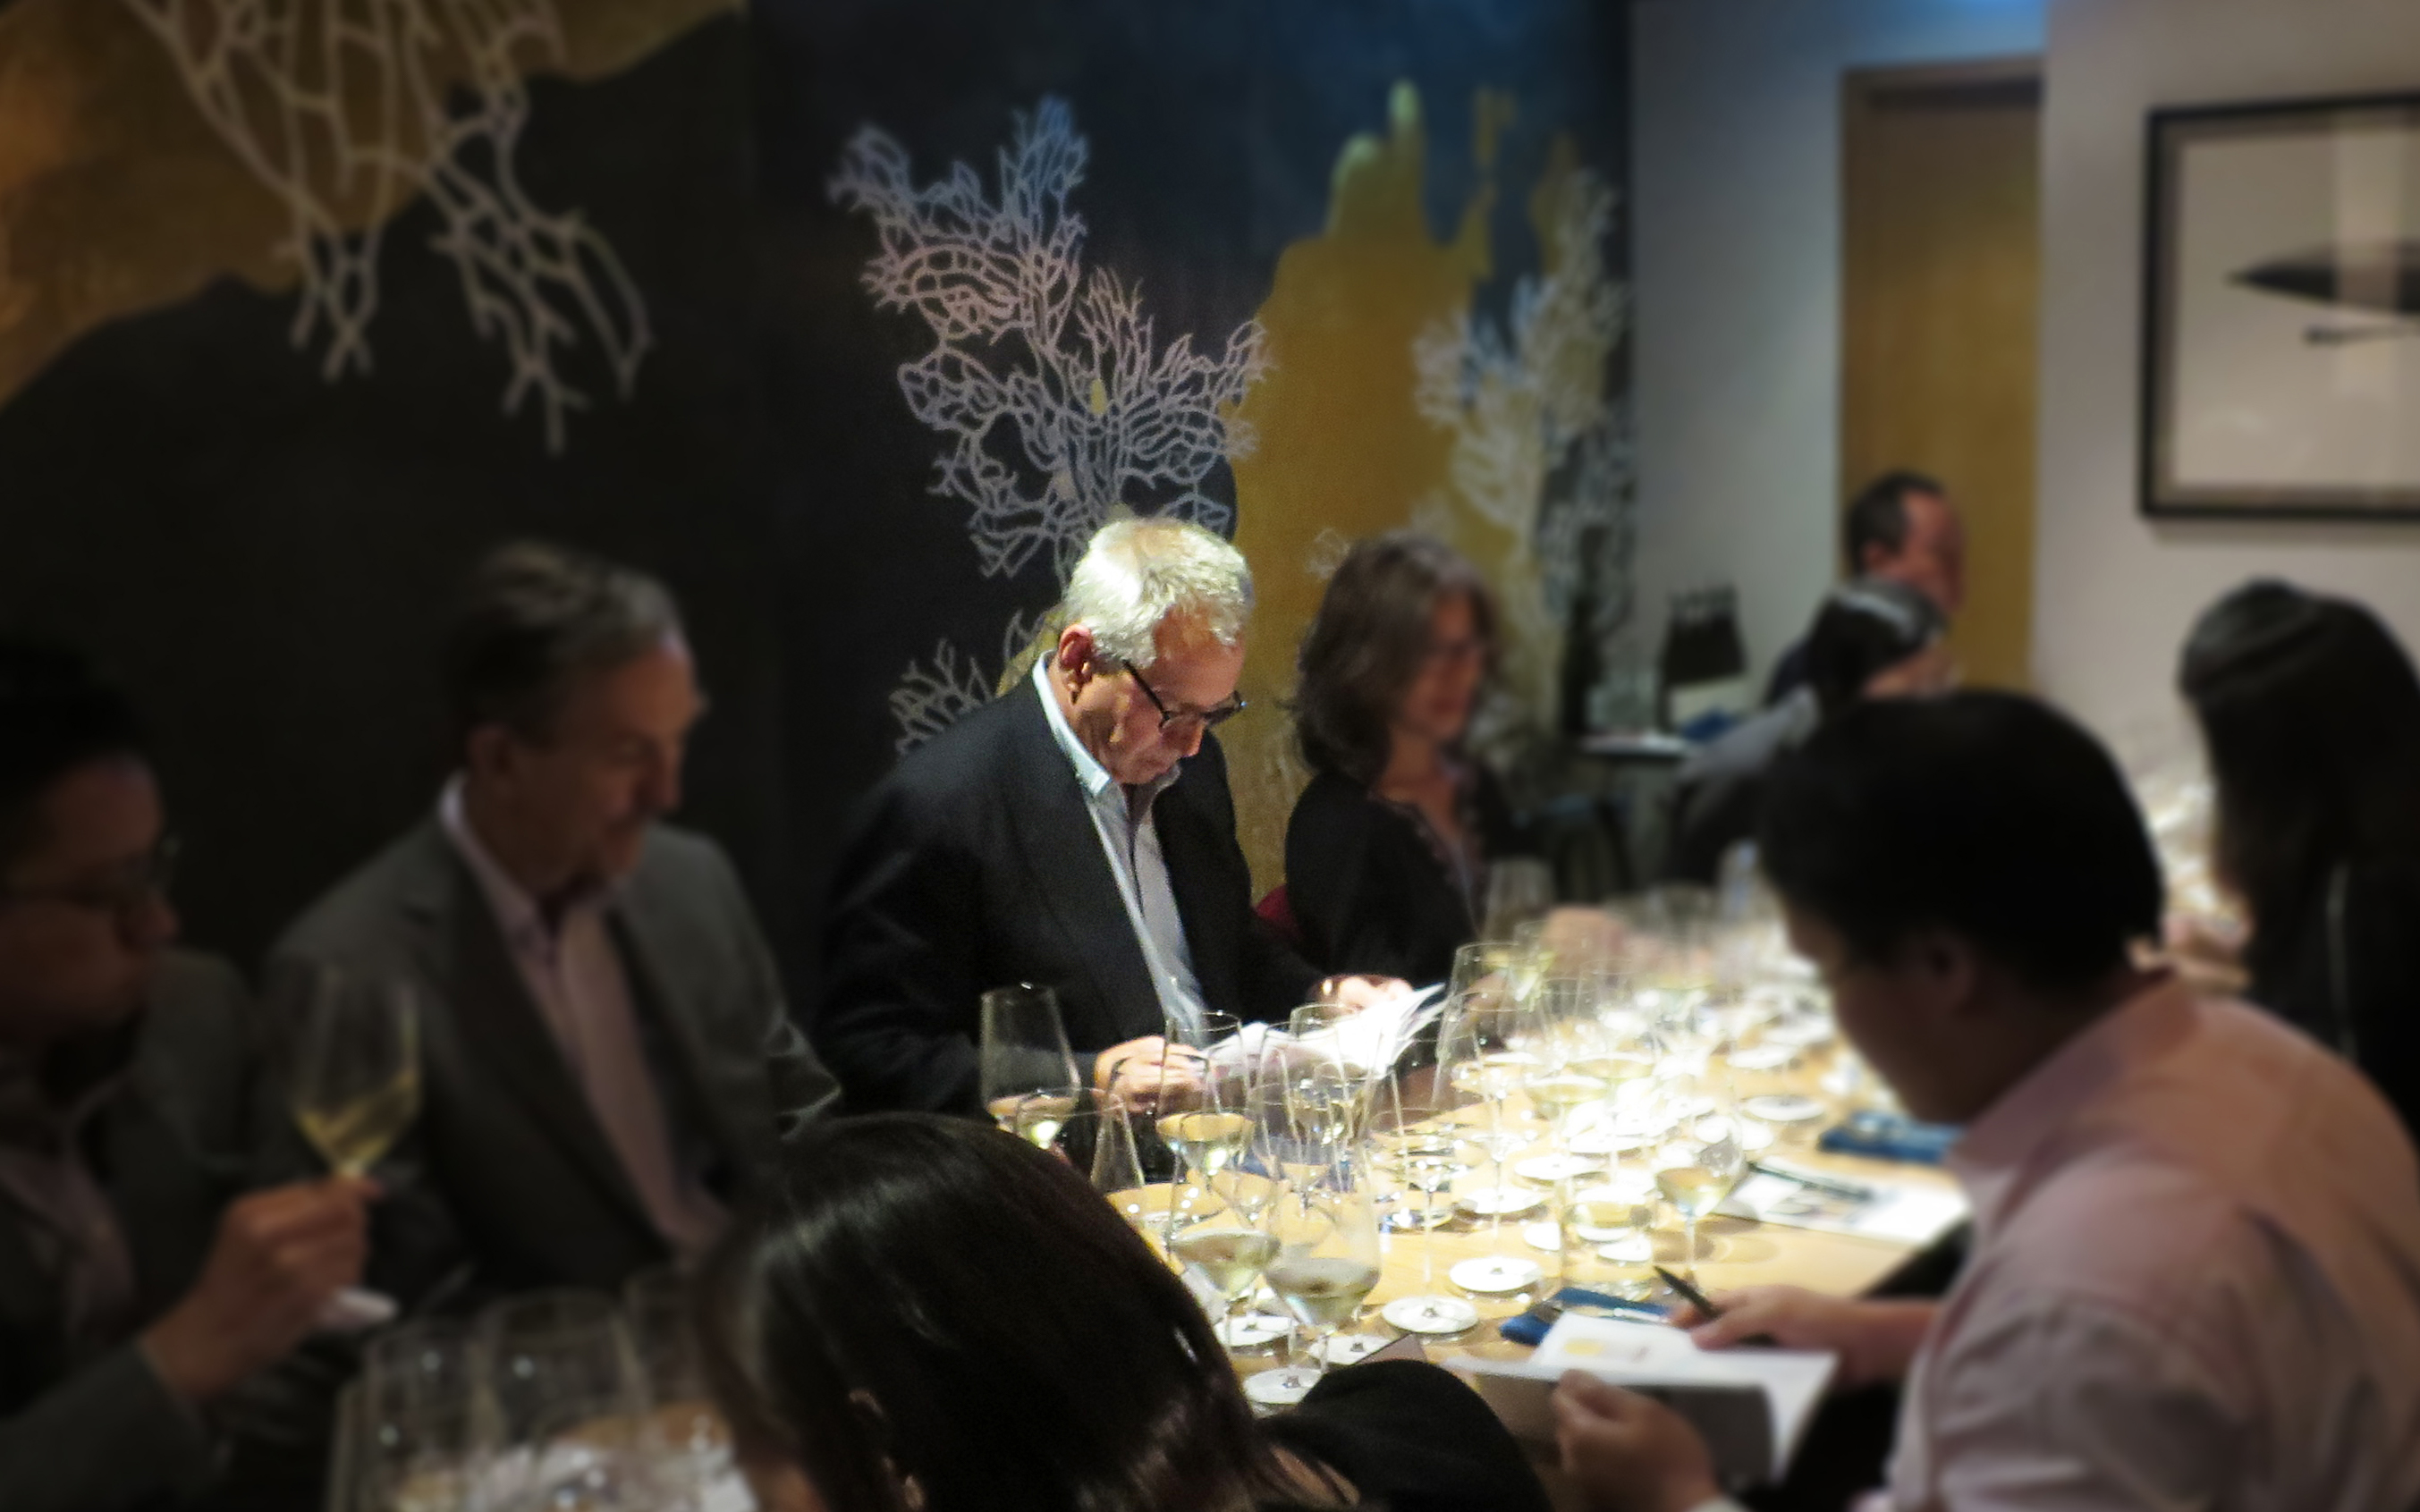 Learning About Wines Through Their Interaction With Food: A Review On Domaine Dublère Dinner